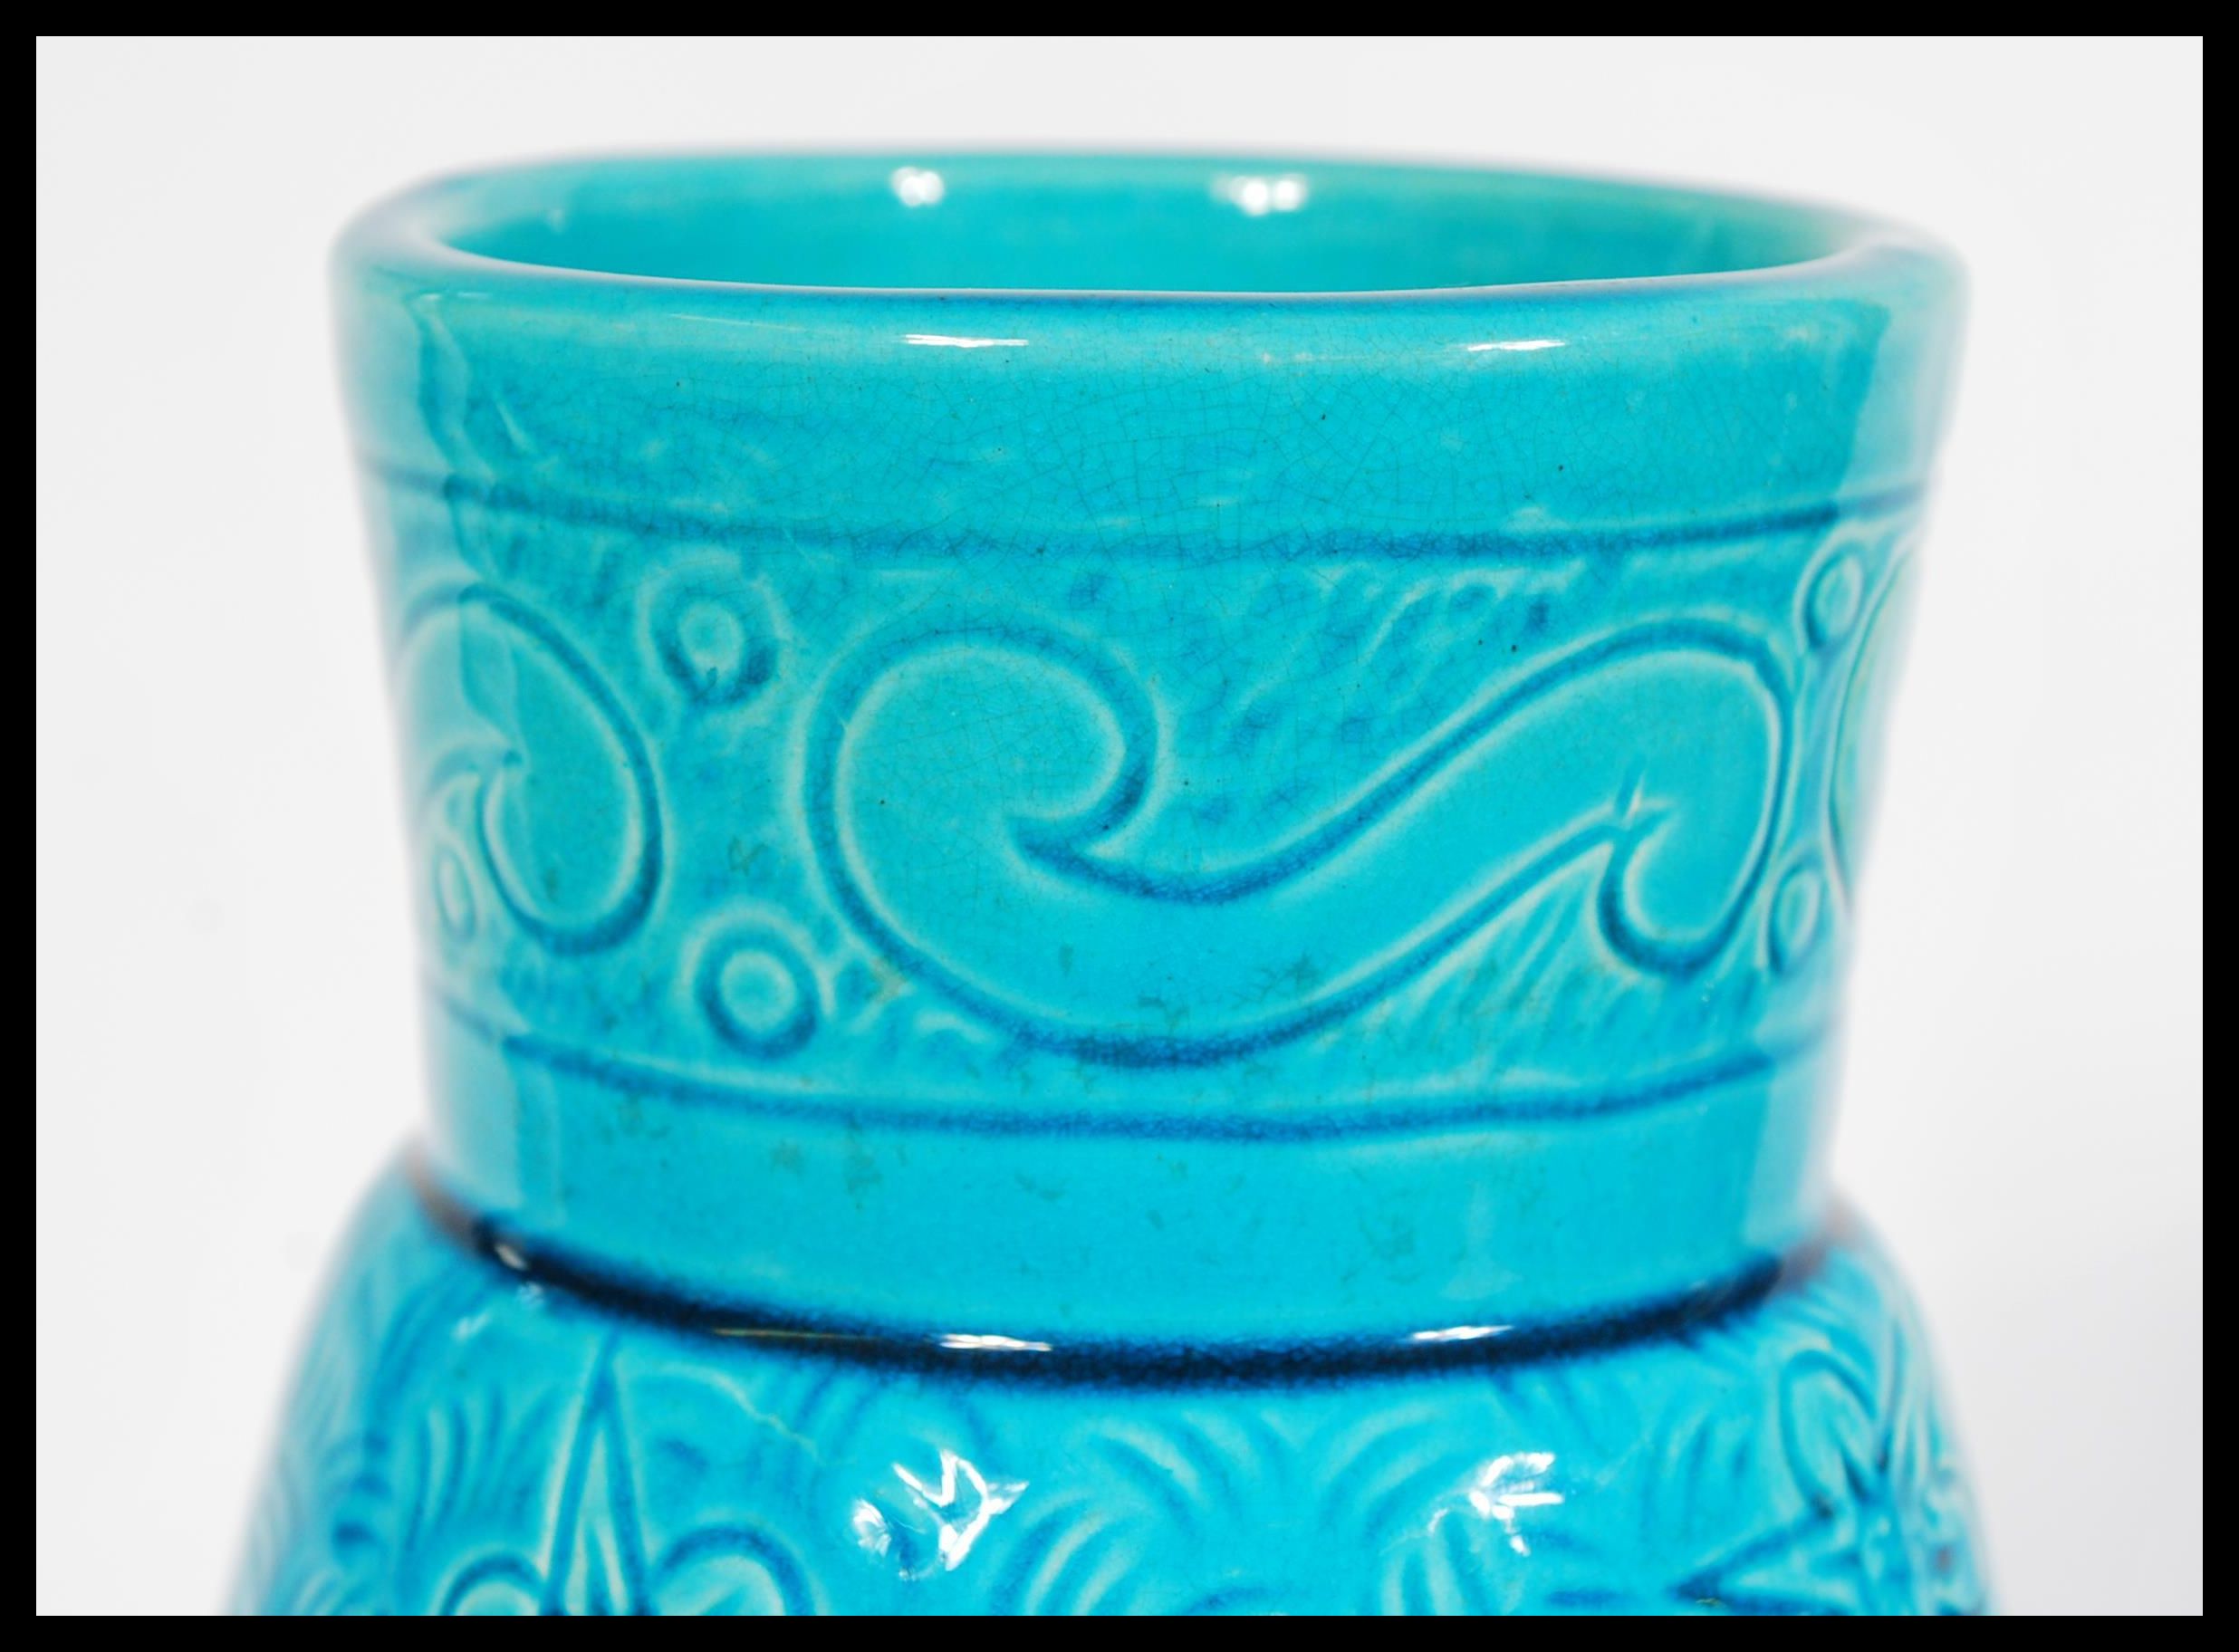 A late 19th century turquoise Burmantofts faience art pottery vase having engraved floral patterning - Image 2 of 6